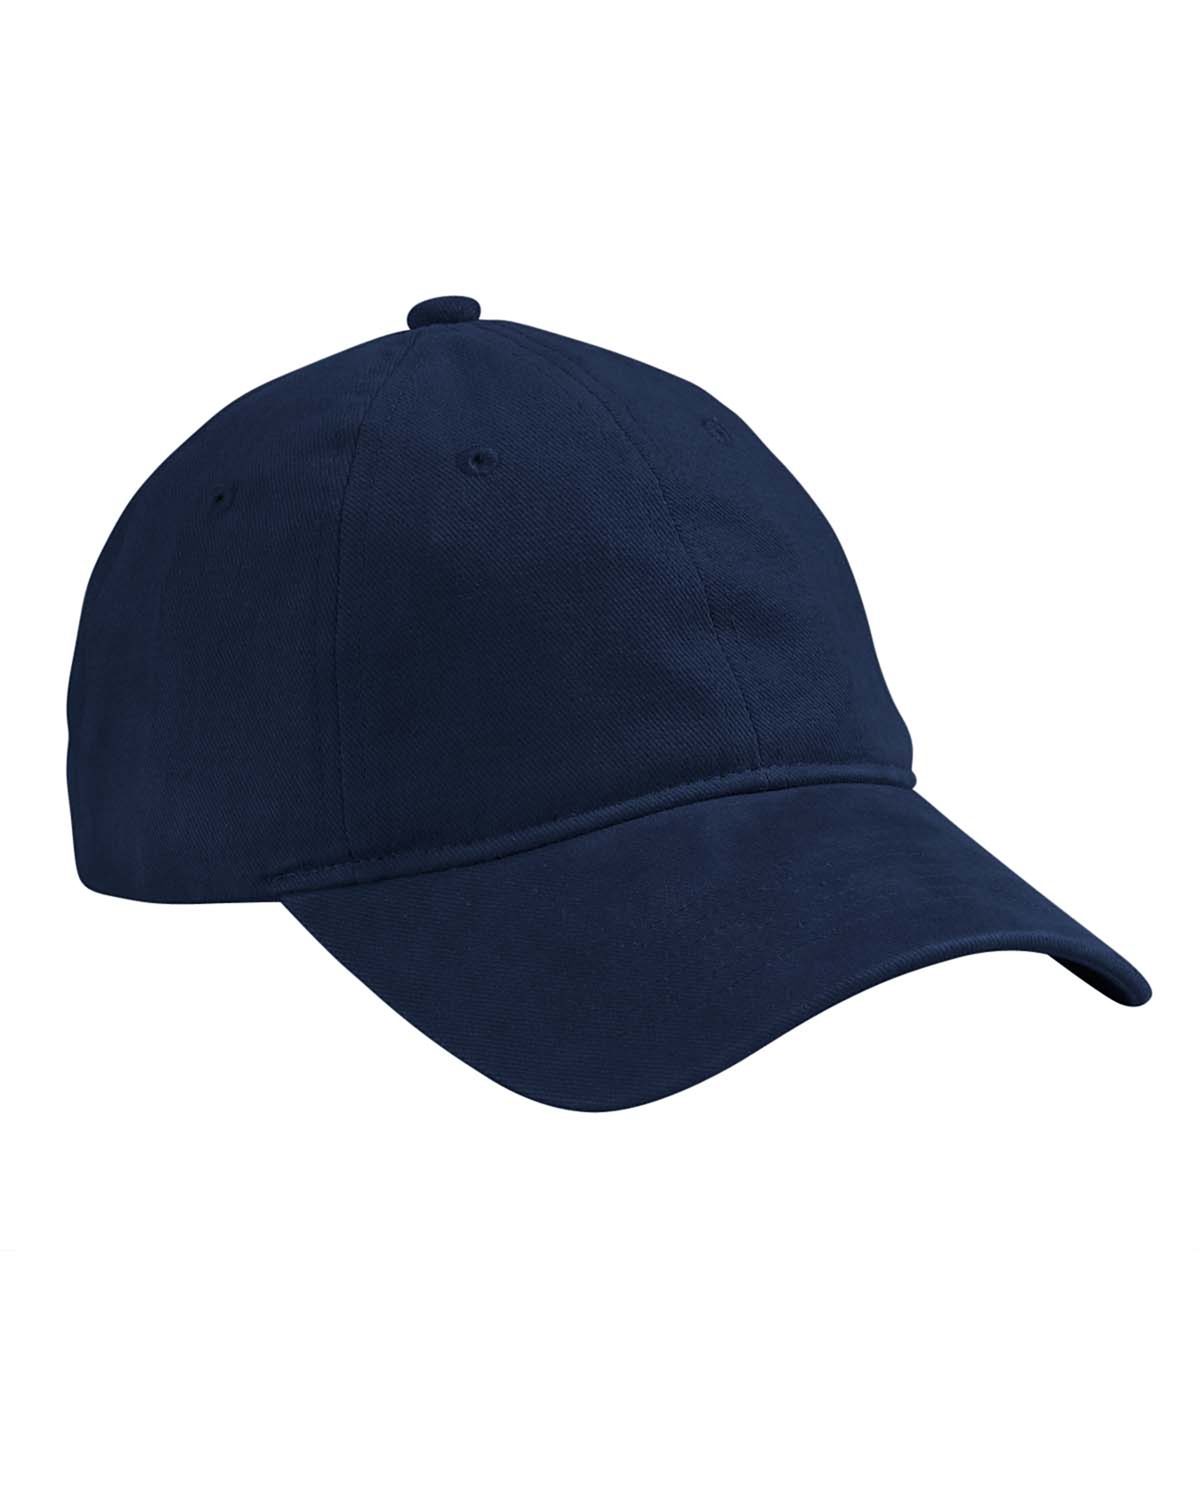 Big Accessories BA511 - Heavy Brushed Twill Unstructured Cap